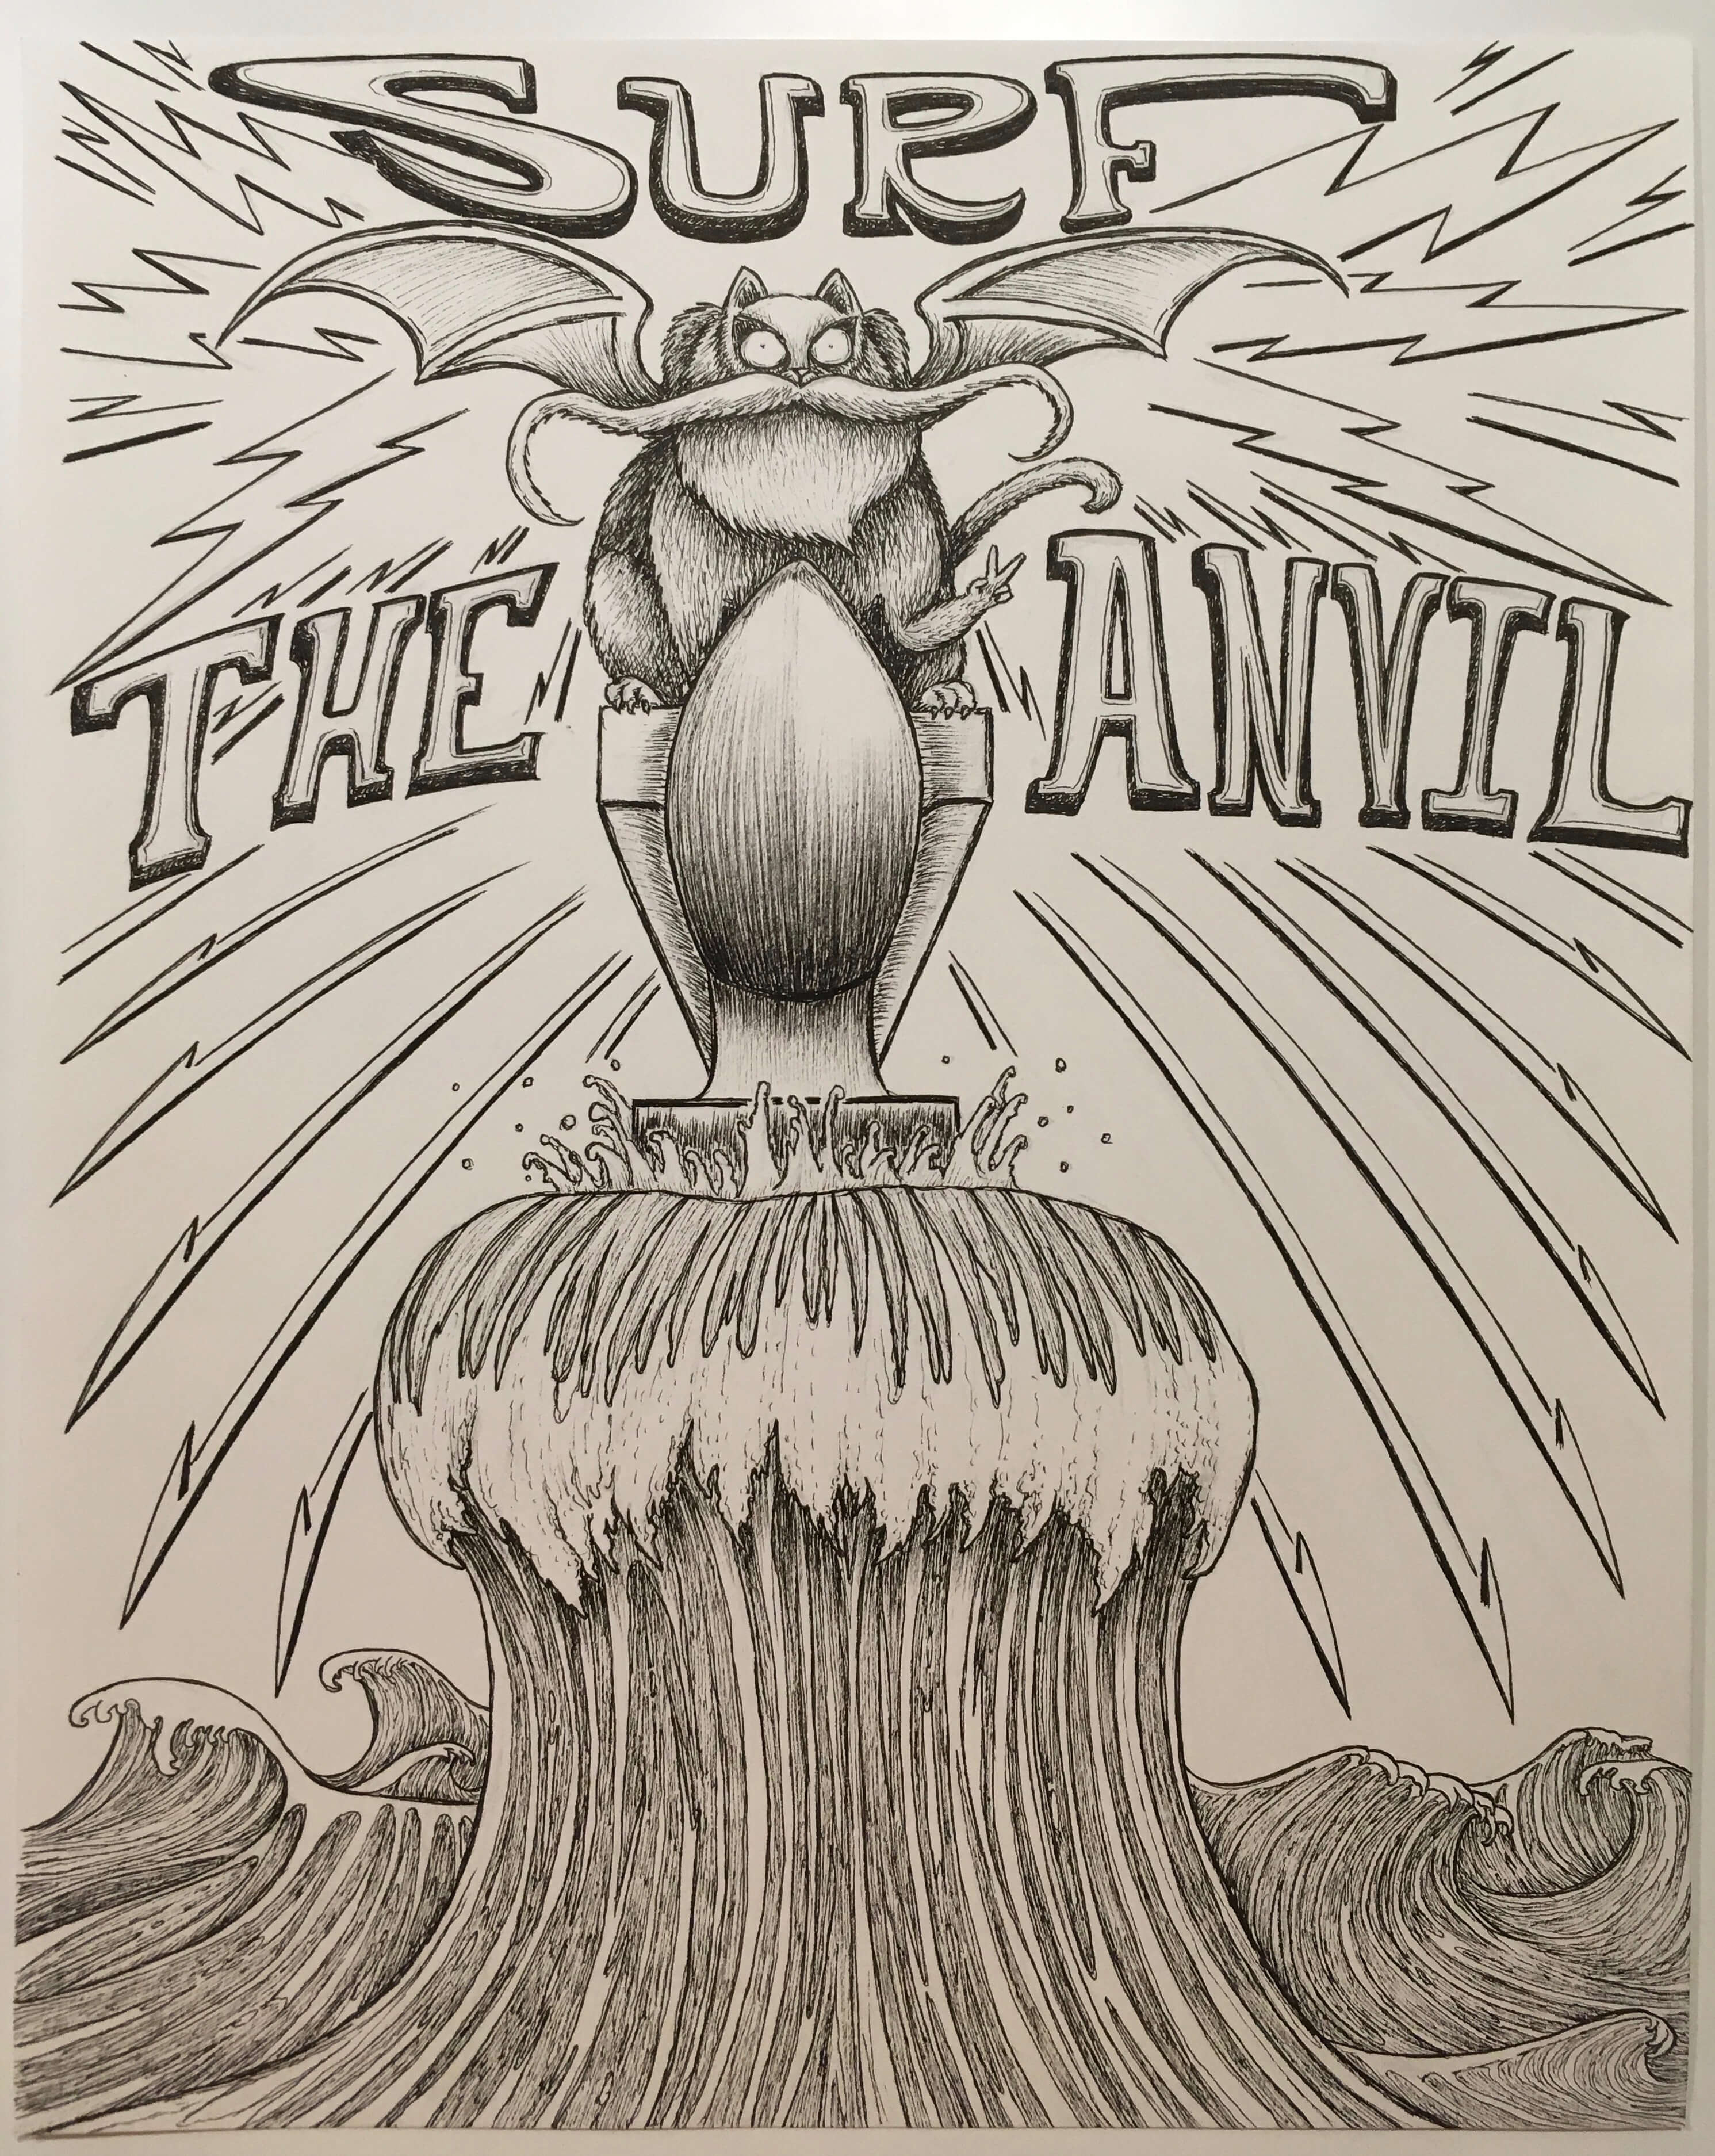 ‘Surf the Anvil’ – 14” x 11” Surfing Cat drawing – pencil and Sakura pens.